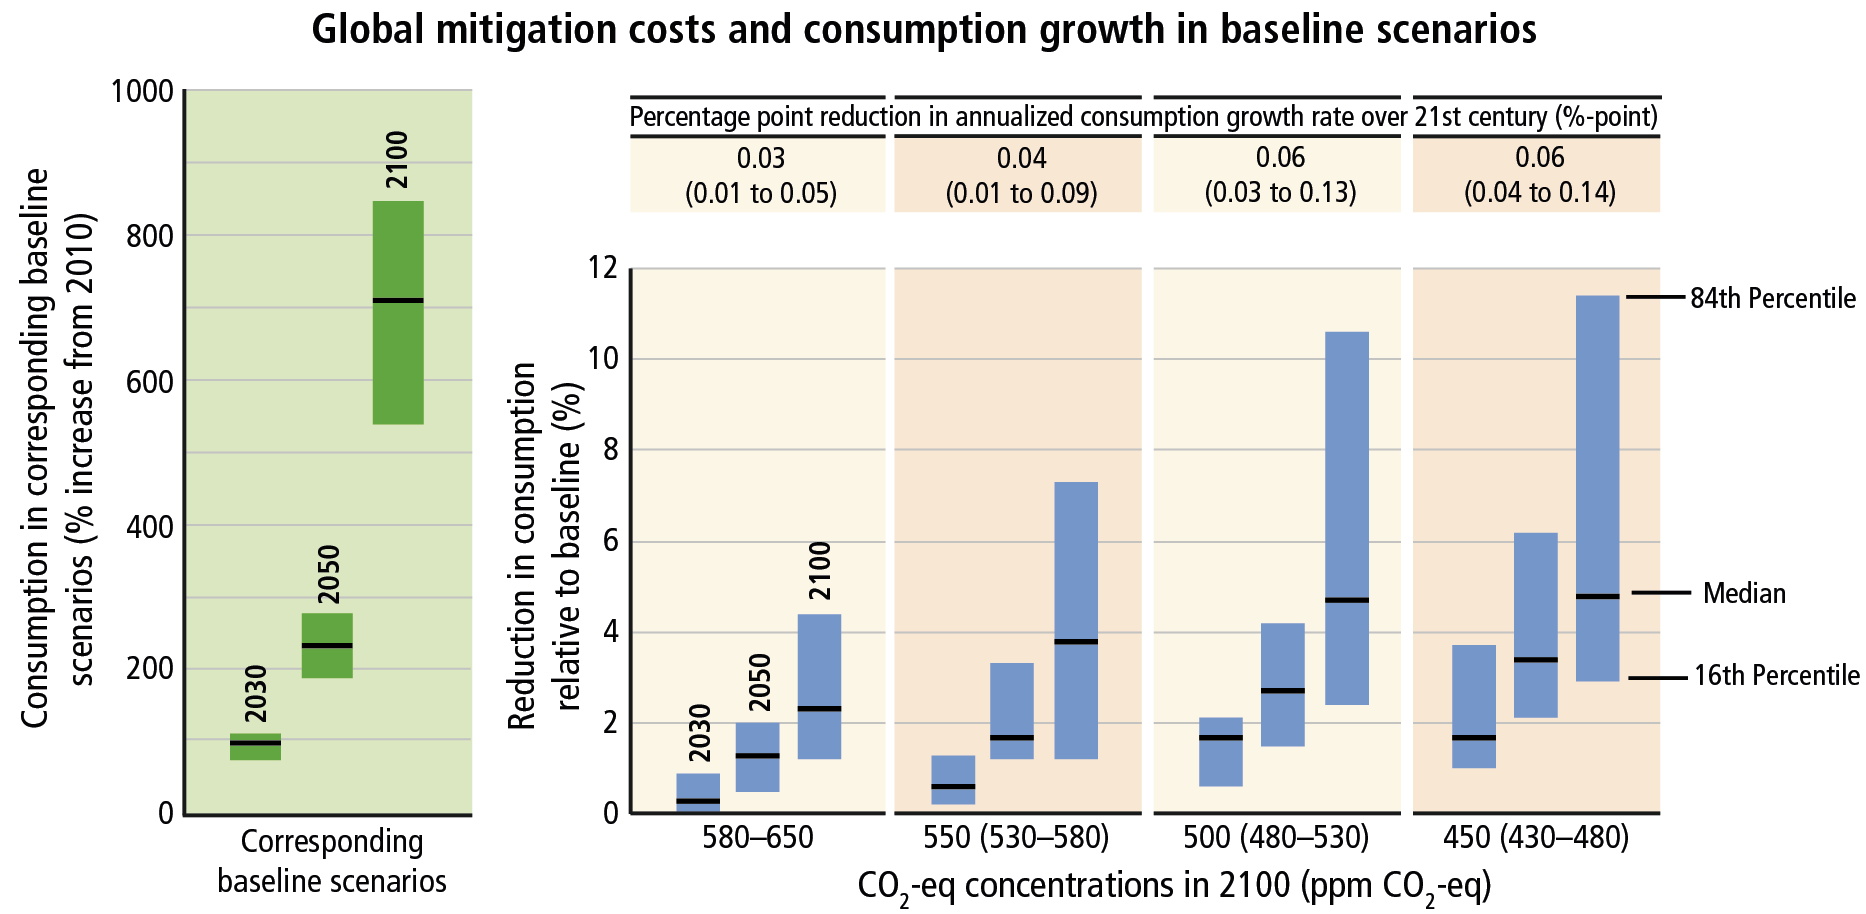 Bar graph of the global mitigation costs and consumption growth showing that in some scenario the reduction needs to be more than 10%